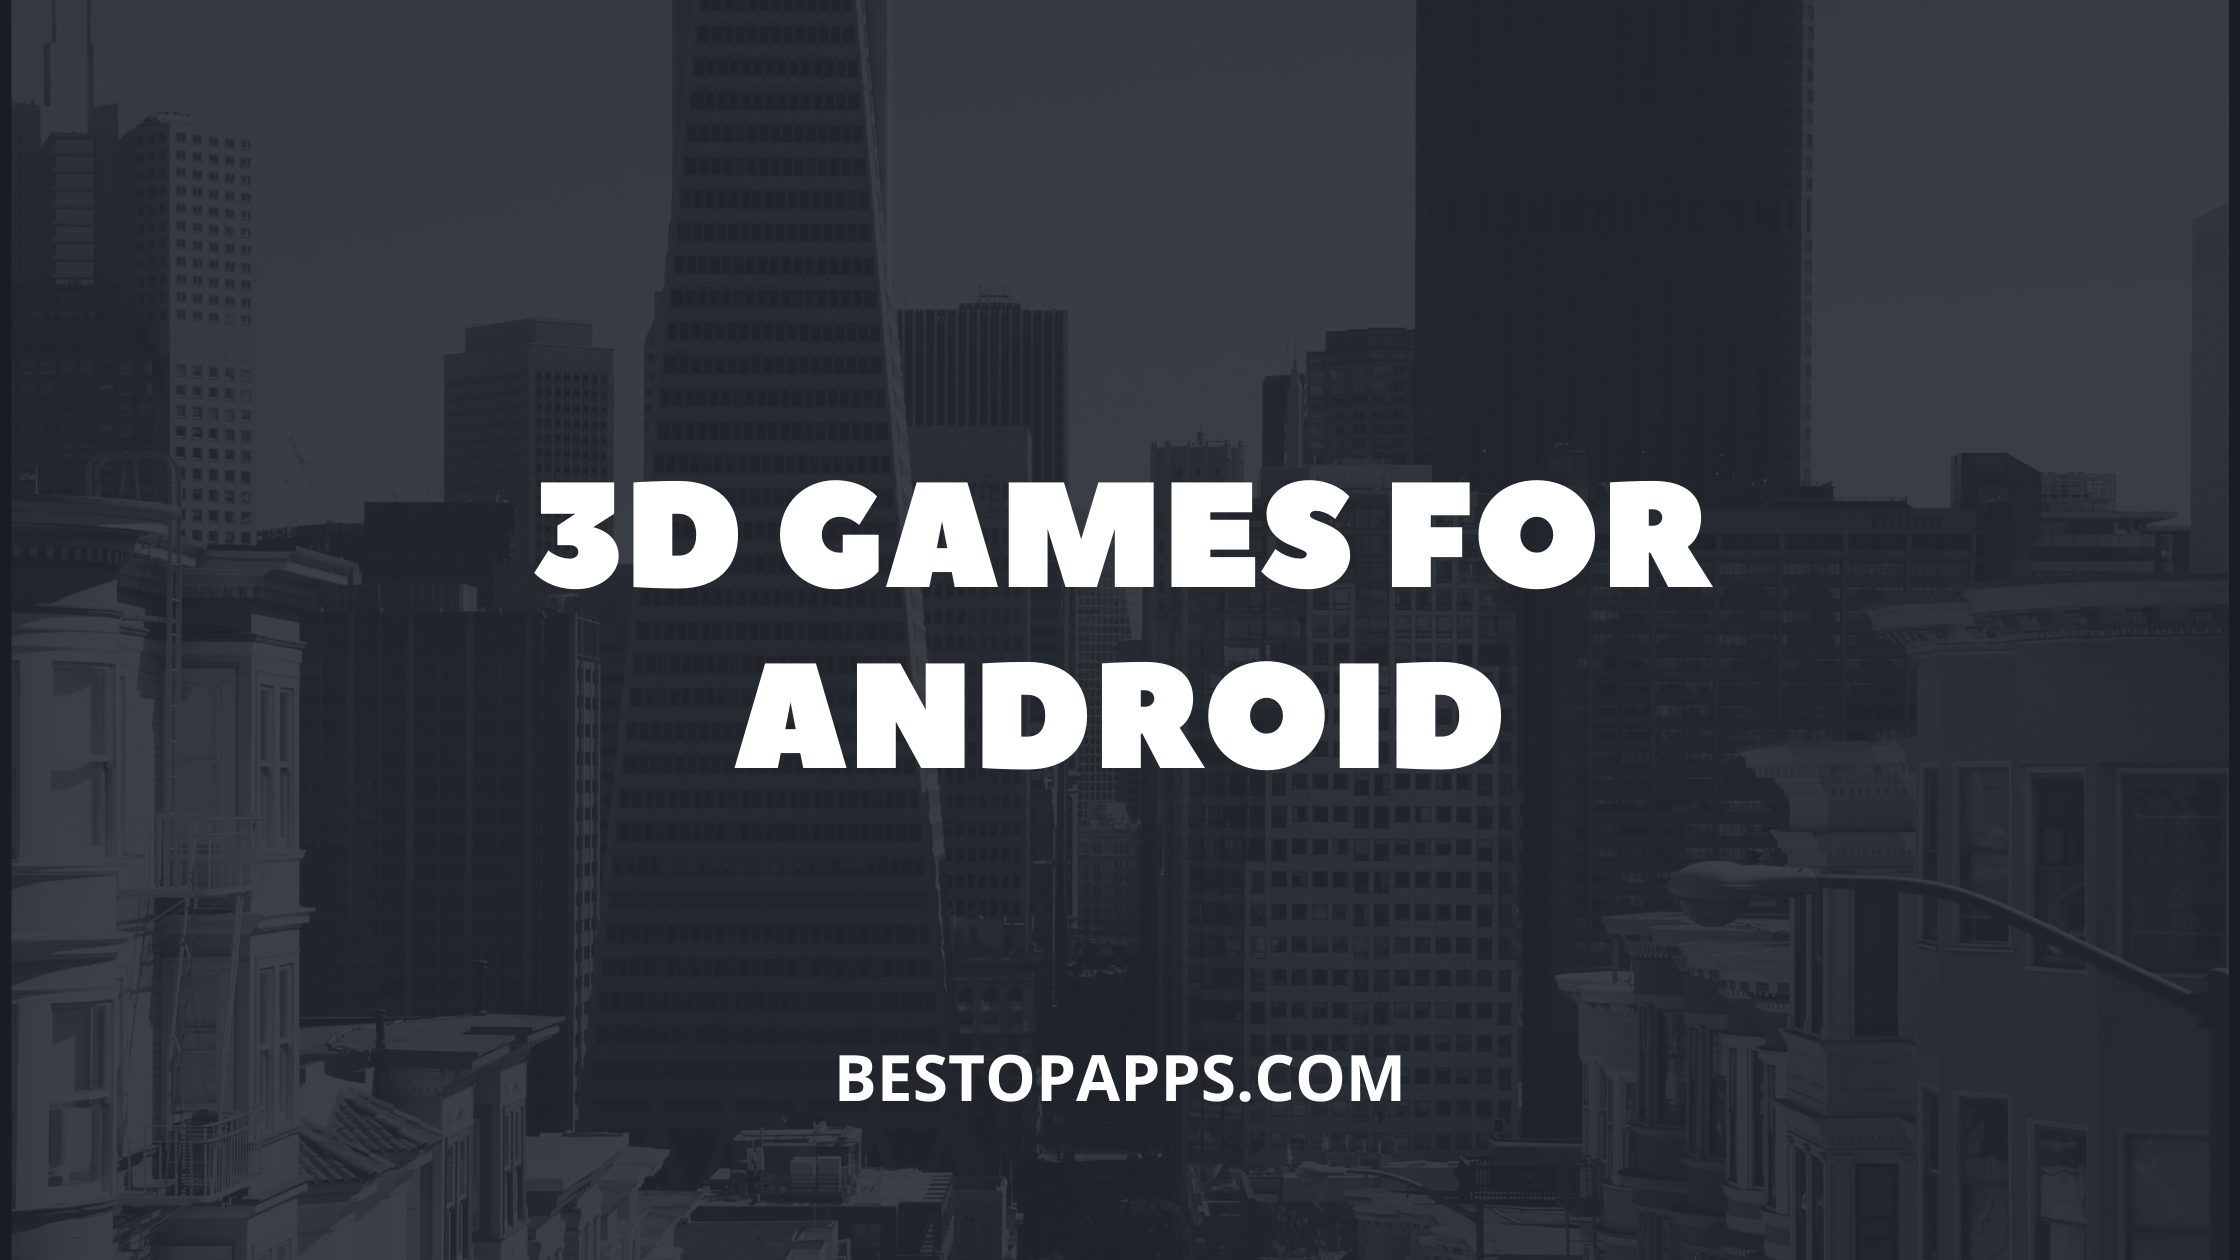 3D GAMES FOR ANDROID